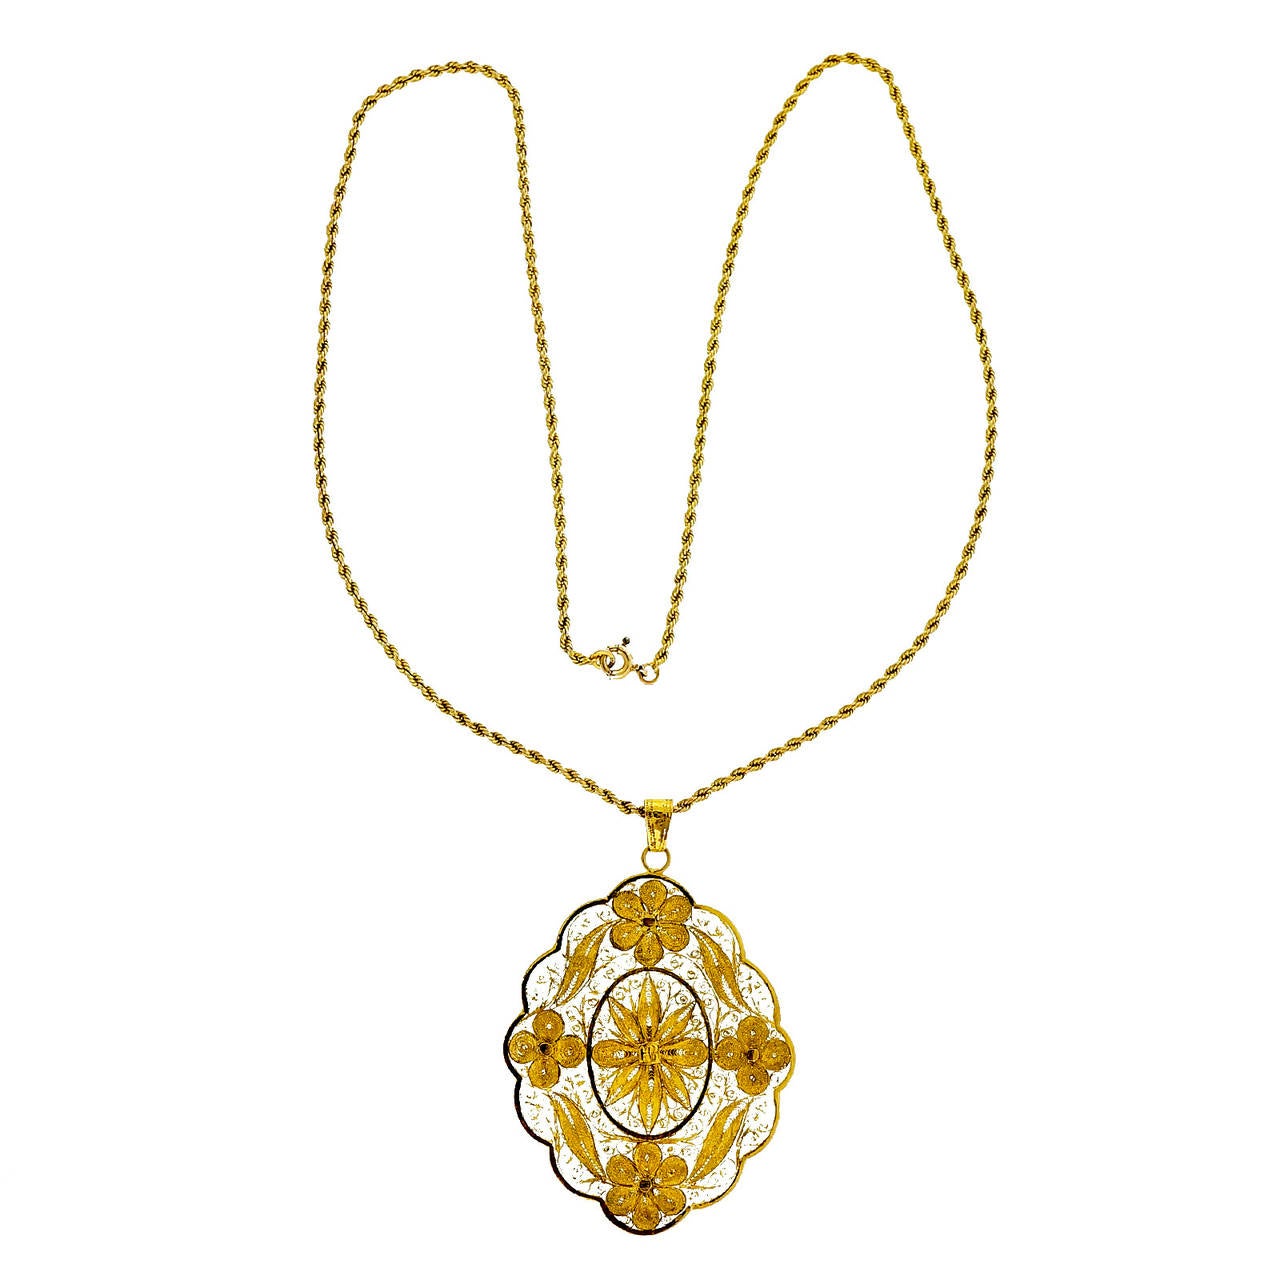 Extra fine handmade delicate filigree pendant made from hundreds of pieces of thin wire all soldered into this beautiful pendant. Circa 1900-1920.

14k & 20k yellow gold
Top to bottom: 45.5mm or 1.79 inches
Width: 34.4mm or 1.35 inches
Depth: